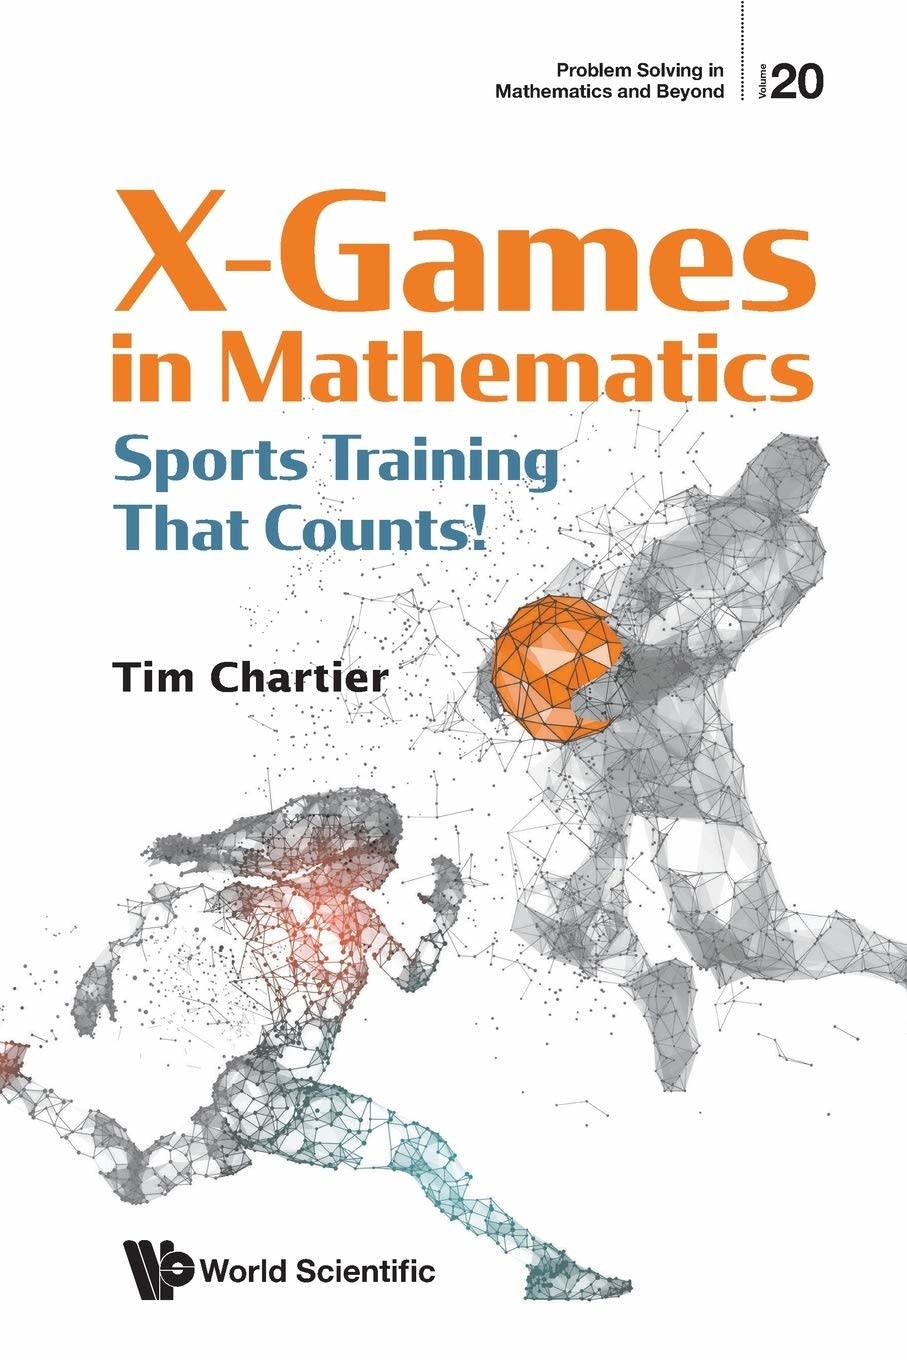 x-games-in-mathematics-sports-training-that-counts.jpg